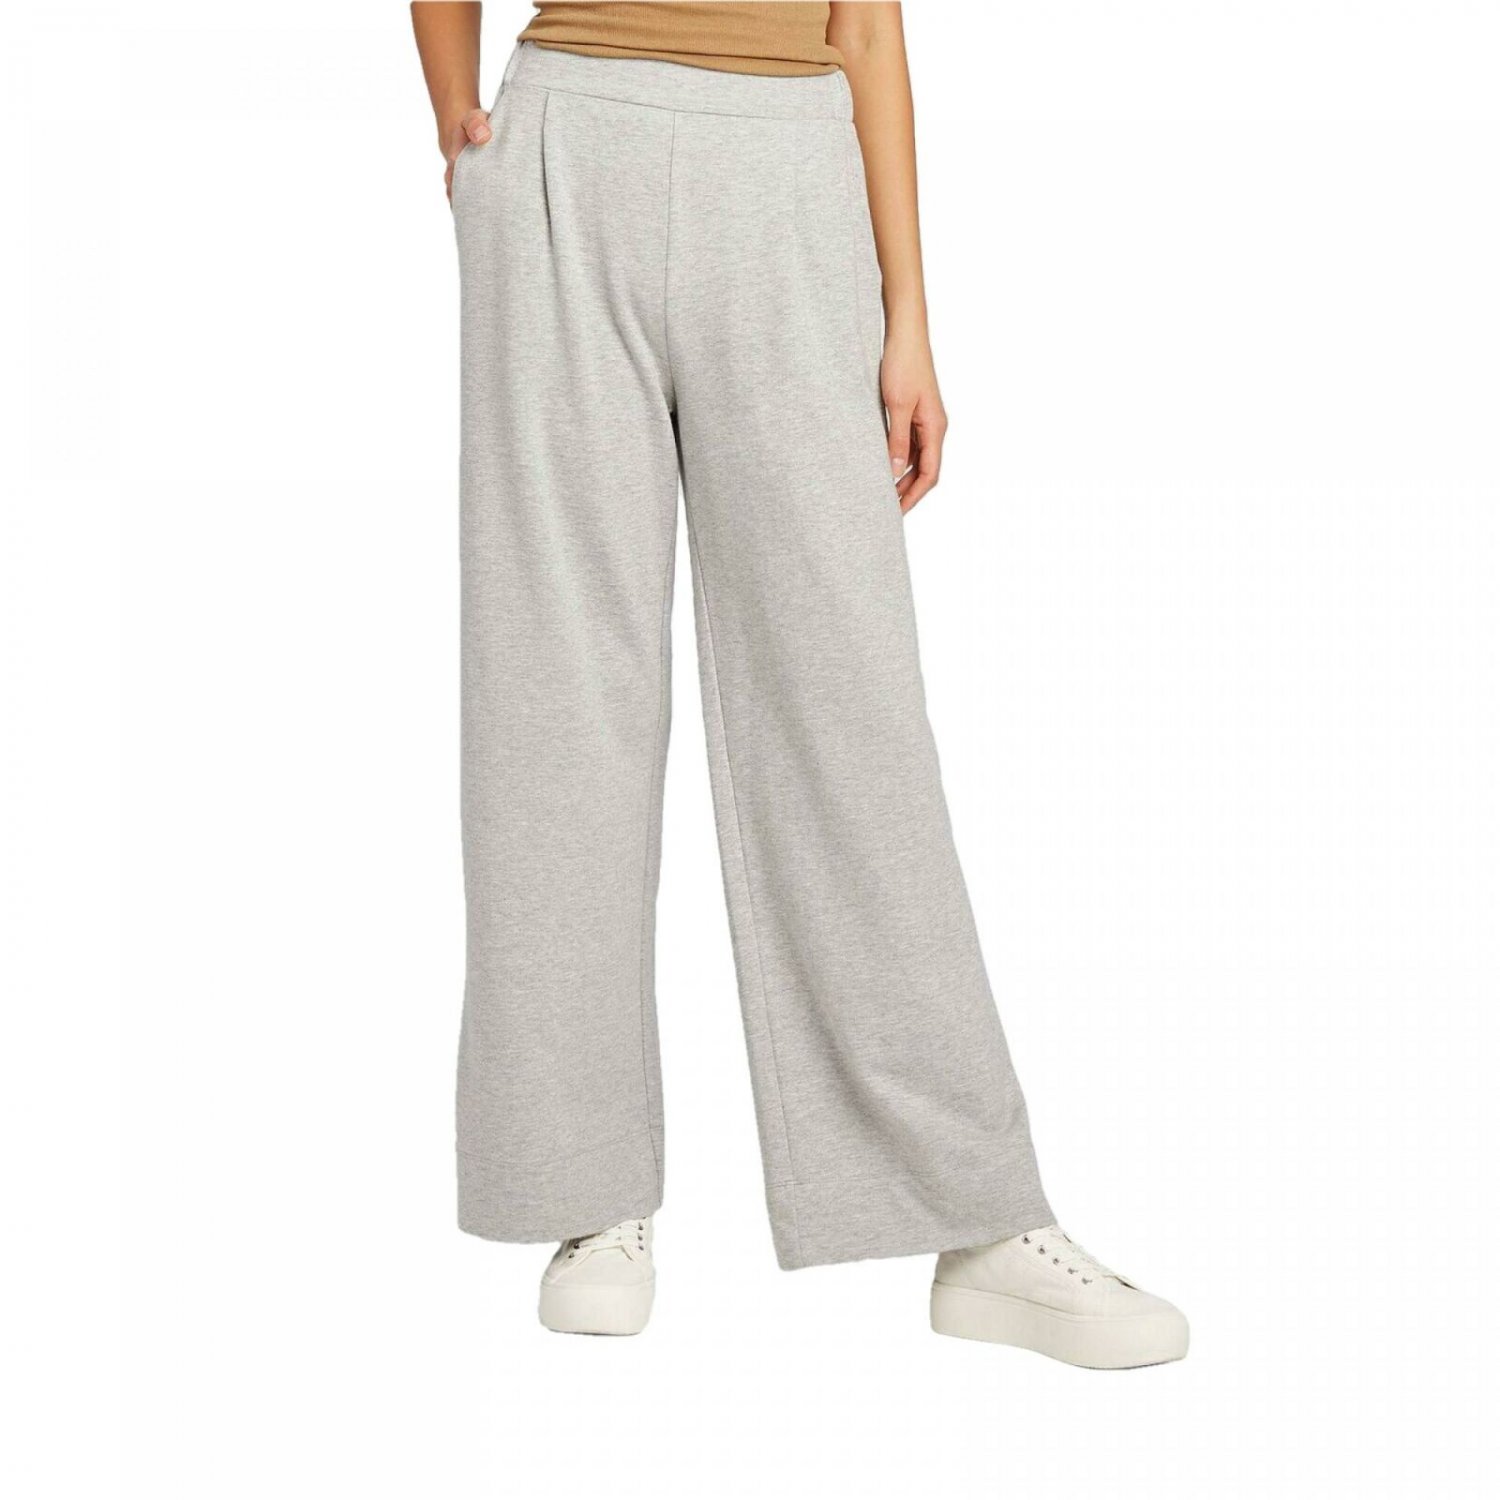 A New Day Women's French Terry Wide Leg Lounge Pants X-Large Light ...